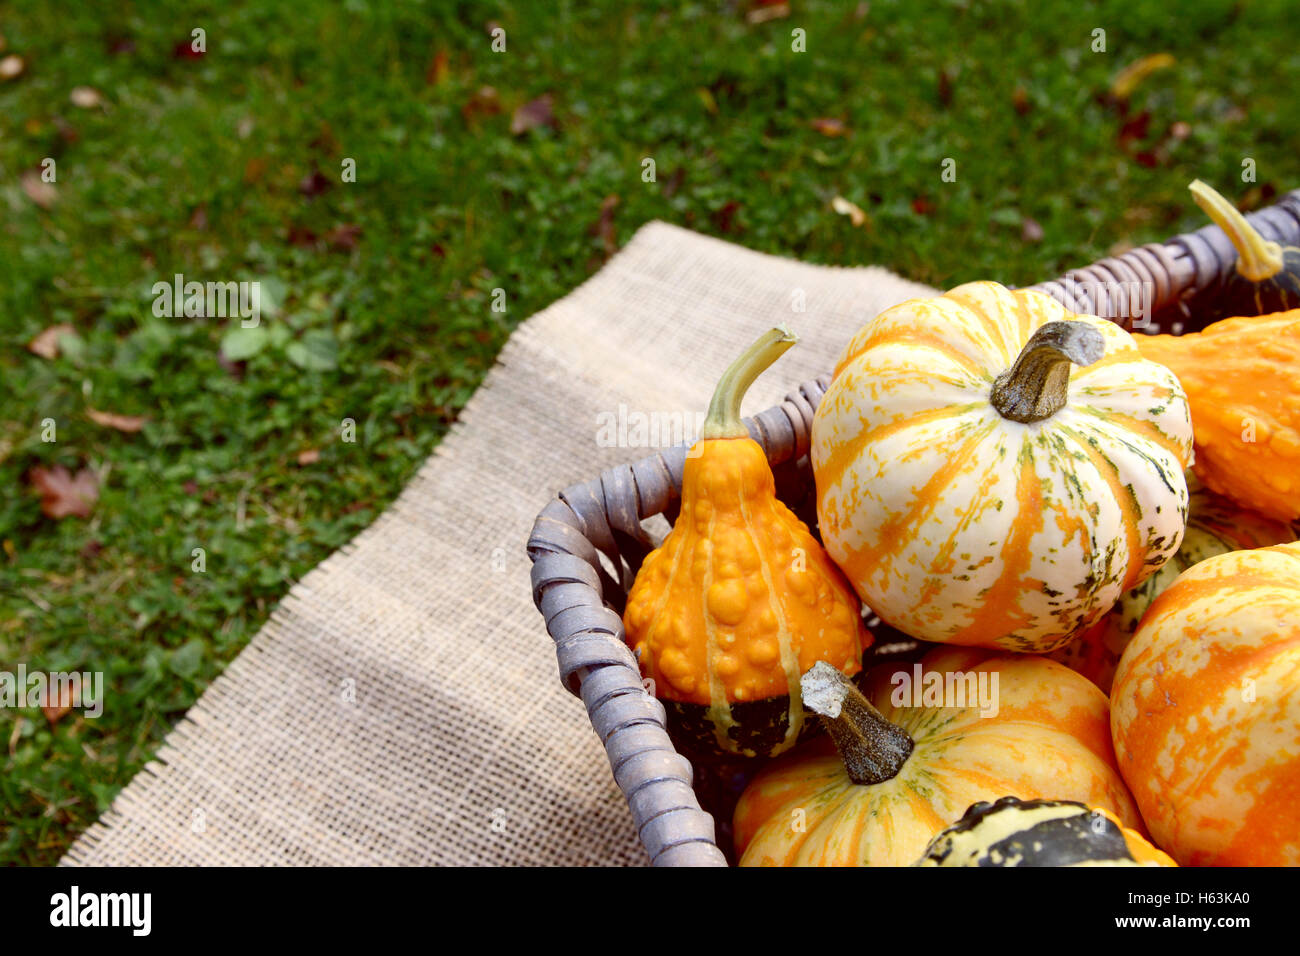 Detail of boldly coloured and patterned gourds in a basket outside in autumn on hessian and grass Stock Photo